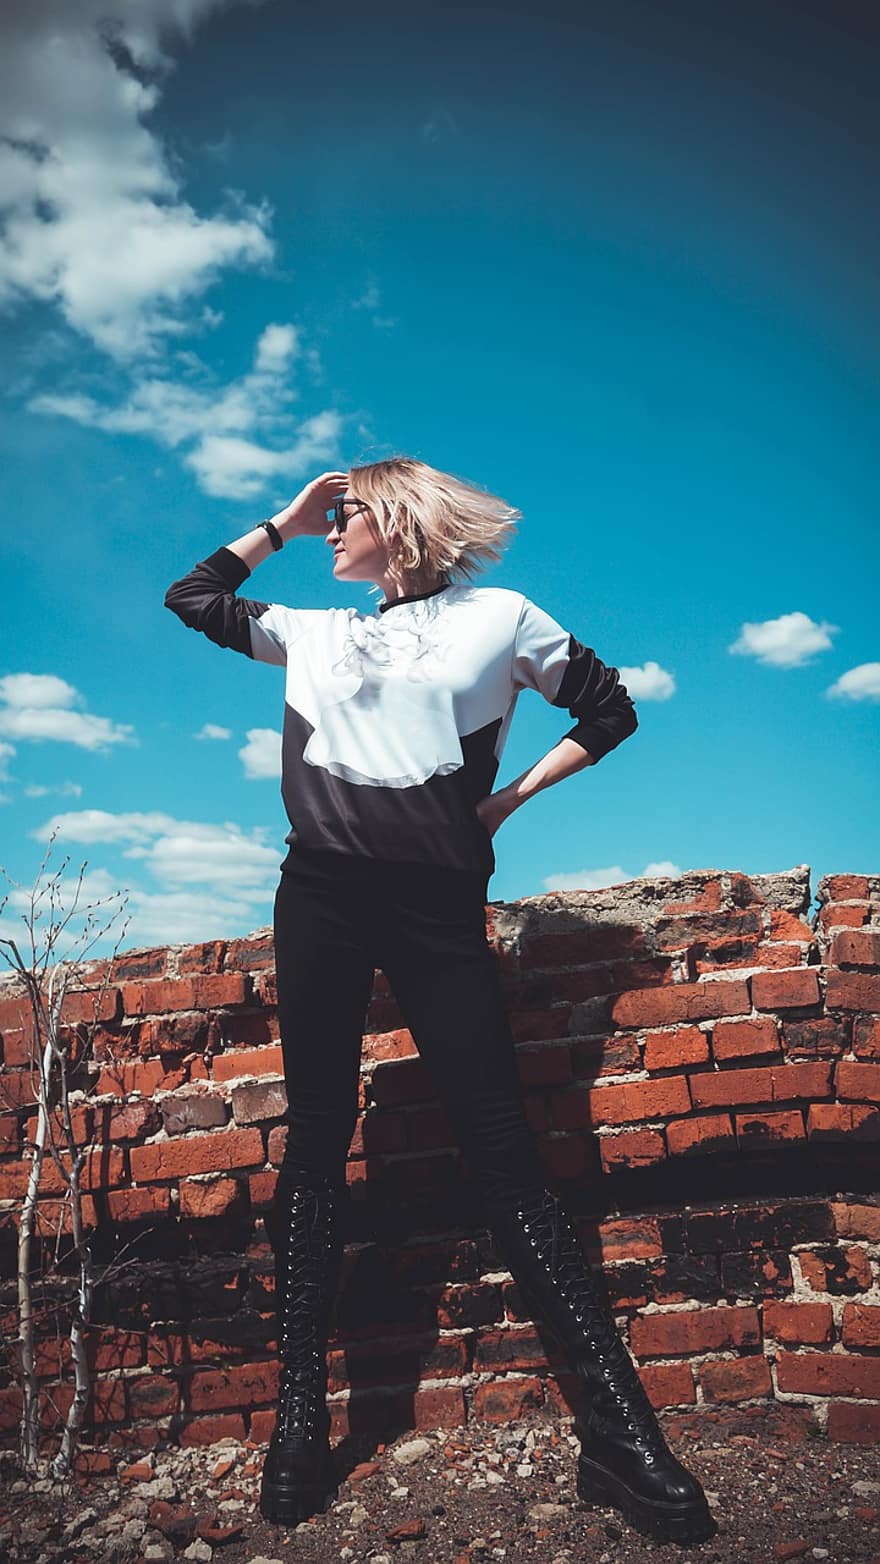 Young Woman, Woman, Blonde, Sky, Street, Clouds, Fashion, Style